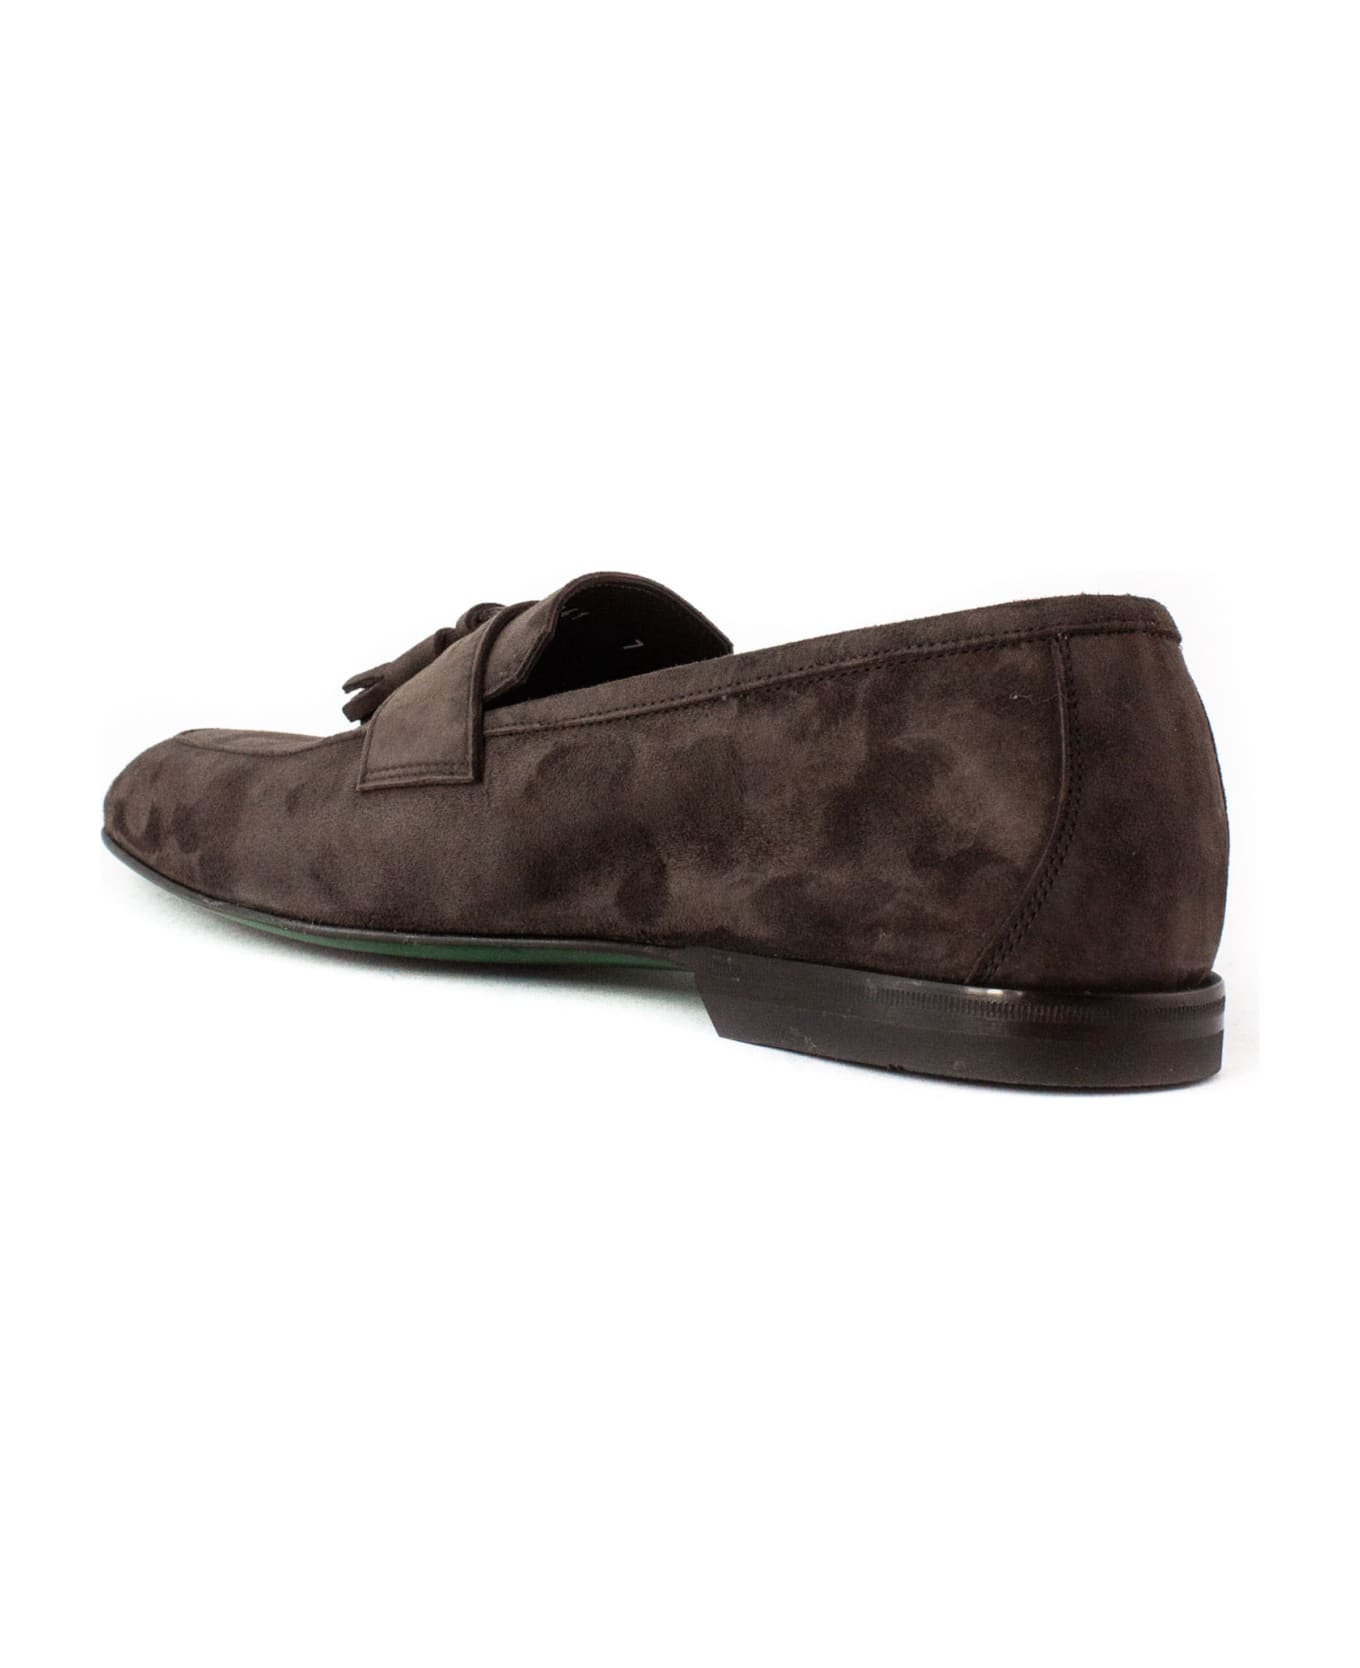 Green George Brown Suede Loafer - Brown ローファー＆デッキシューズ